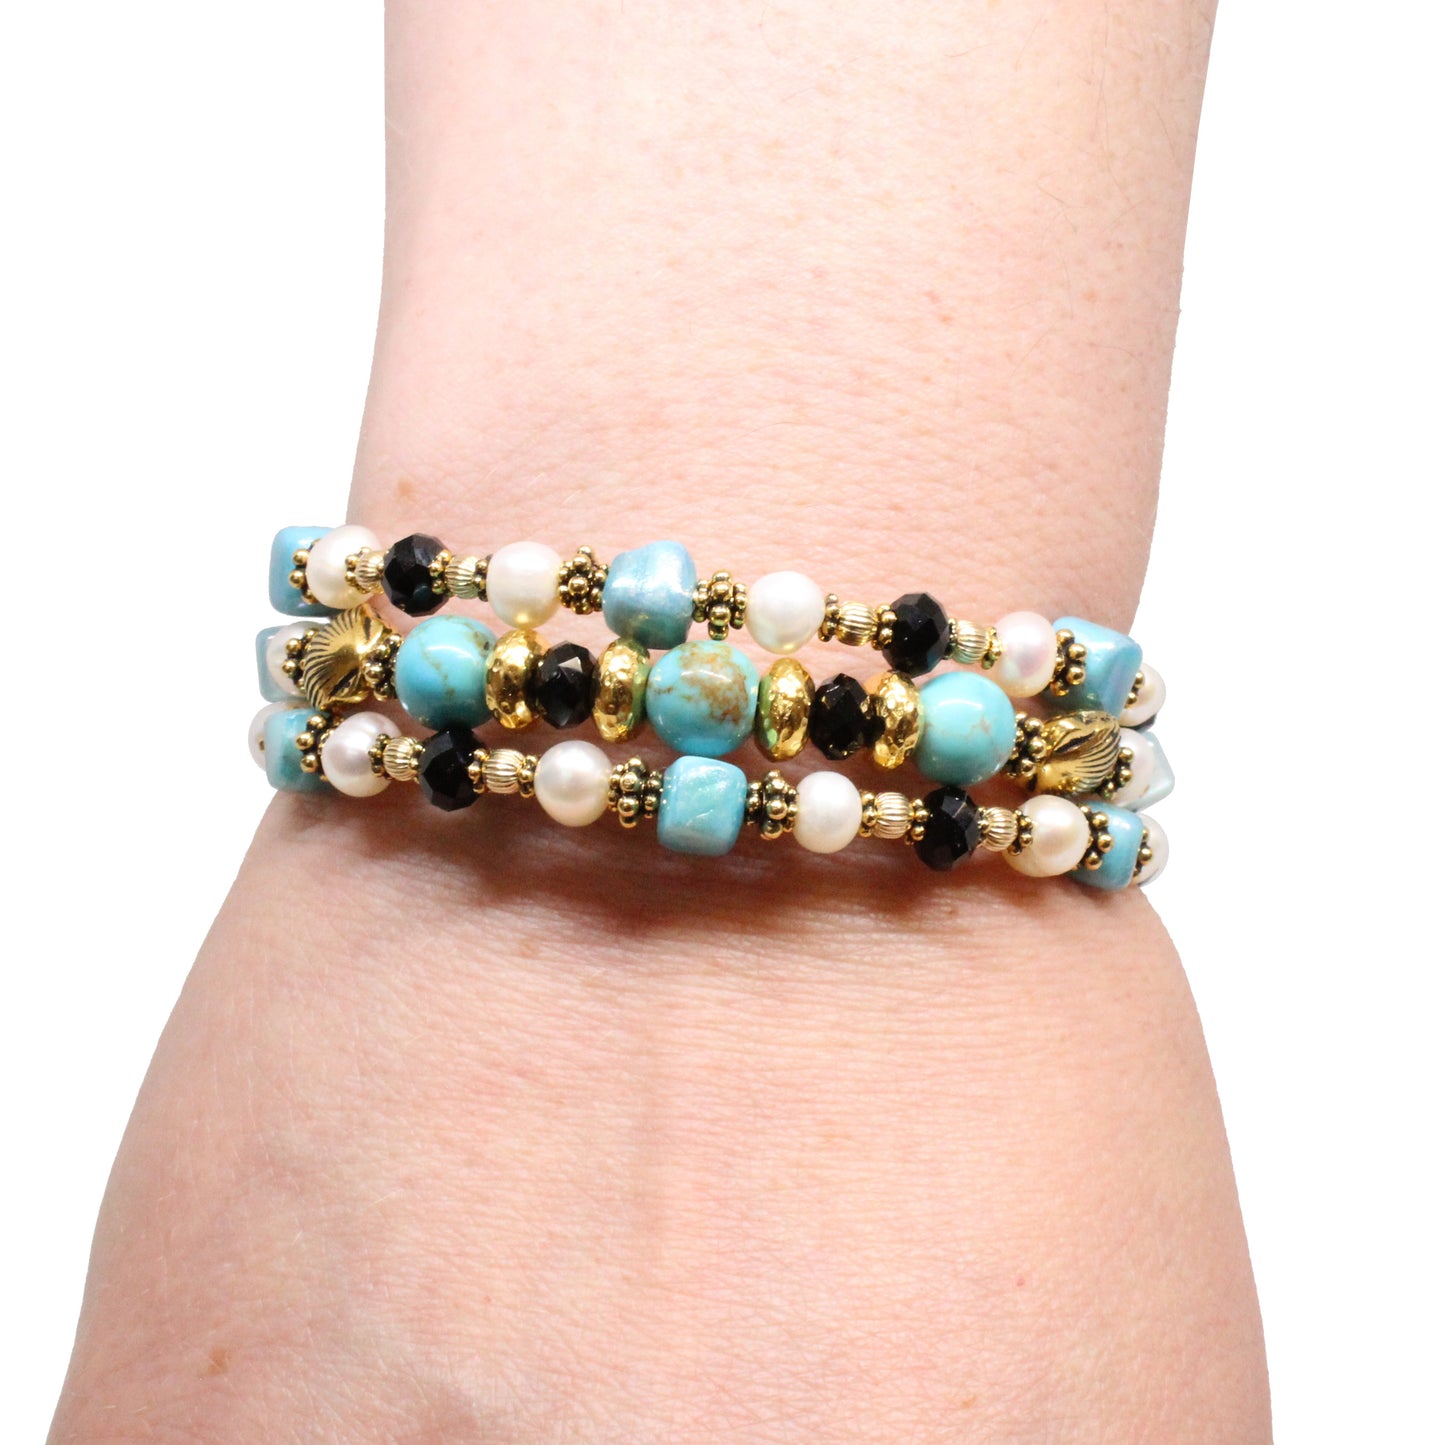 Turquoise Island Triple Wrap Bracelet / 6 to 8 Inch wrist size / with freshwater pearls and shells / gold pewter beads